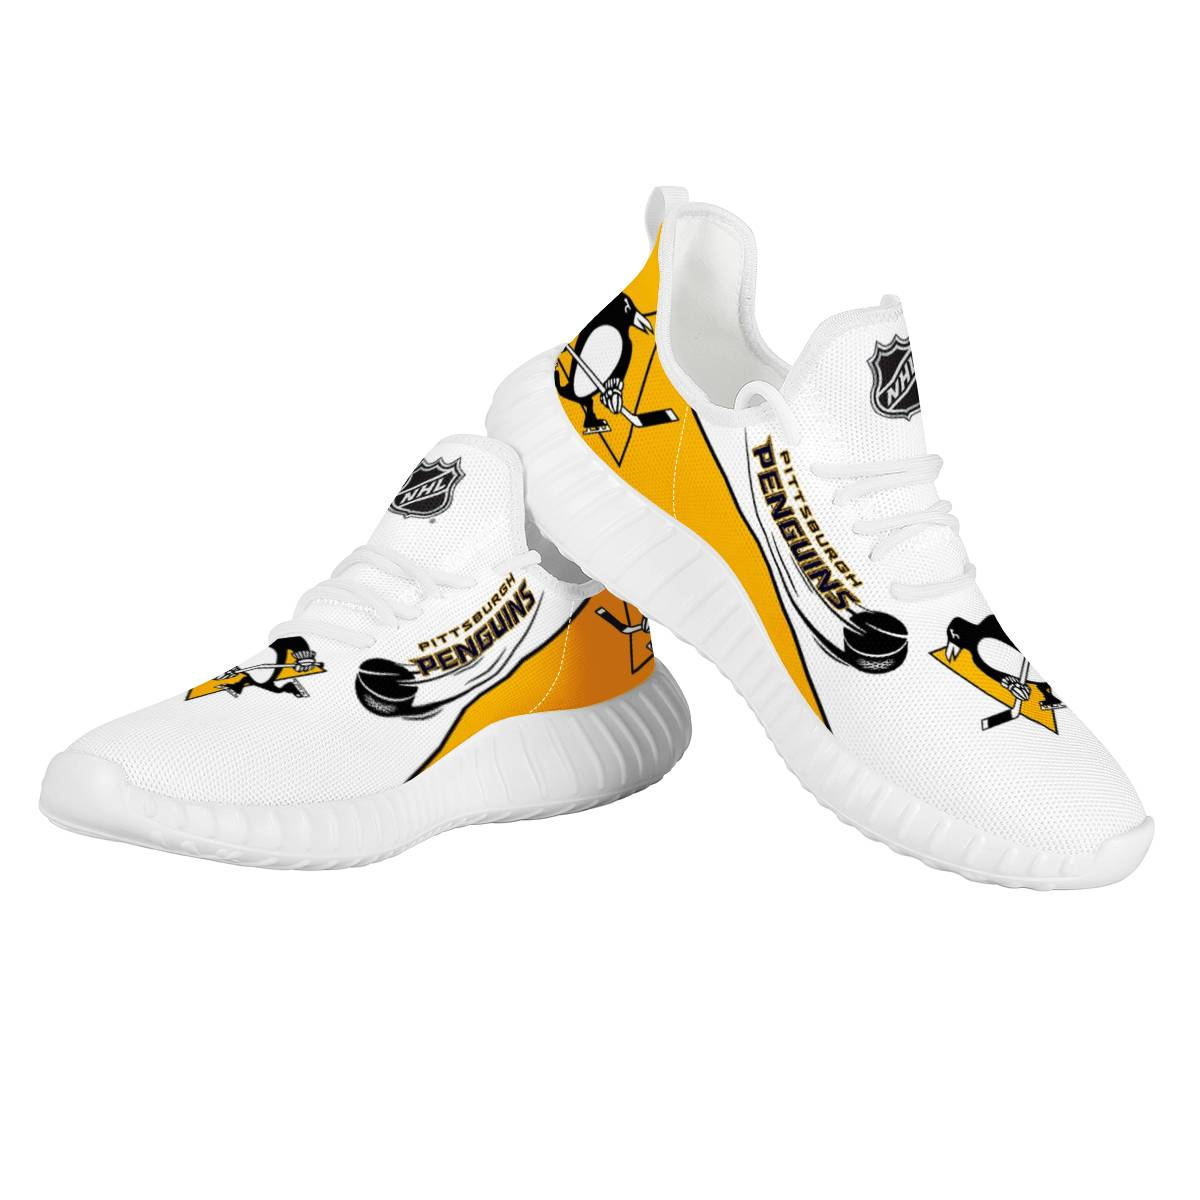 Men's NHL Pittsburgh Penguins Mesh Knit Sneakers/Shoes 002